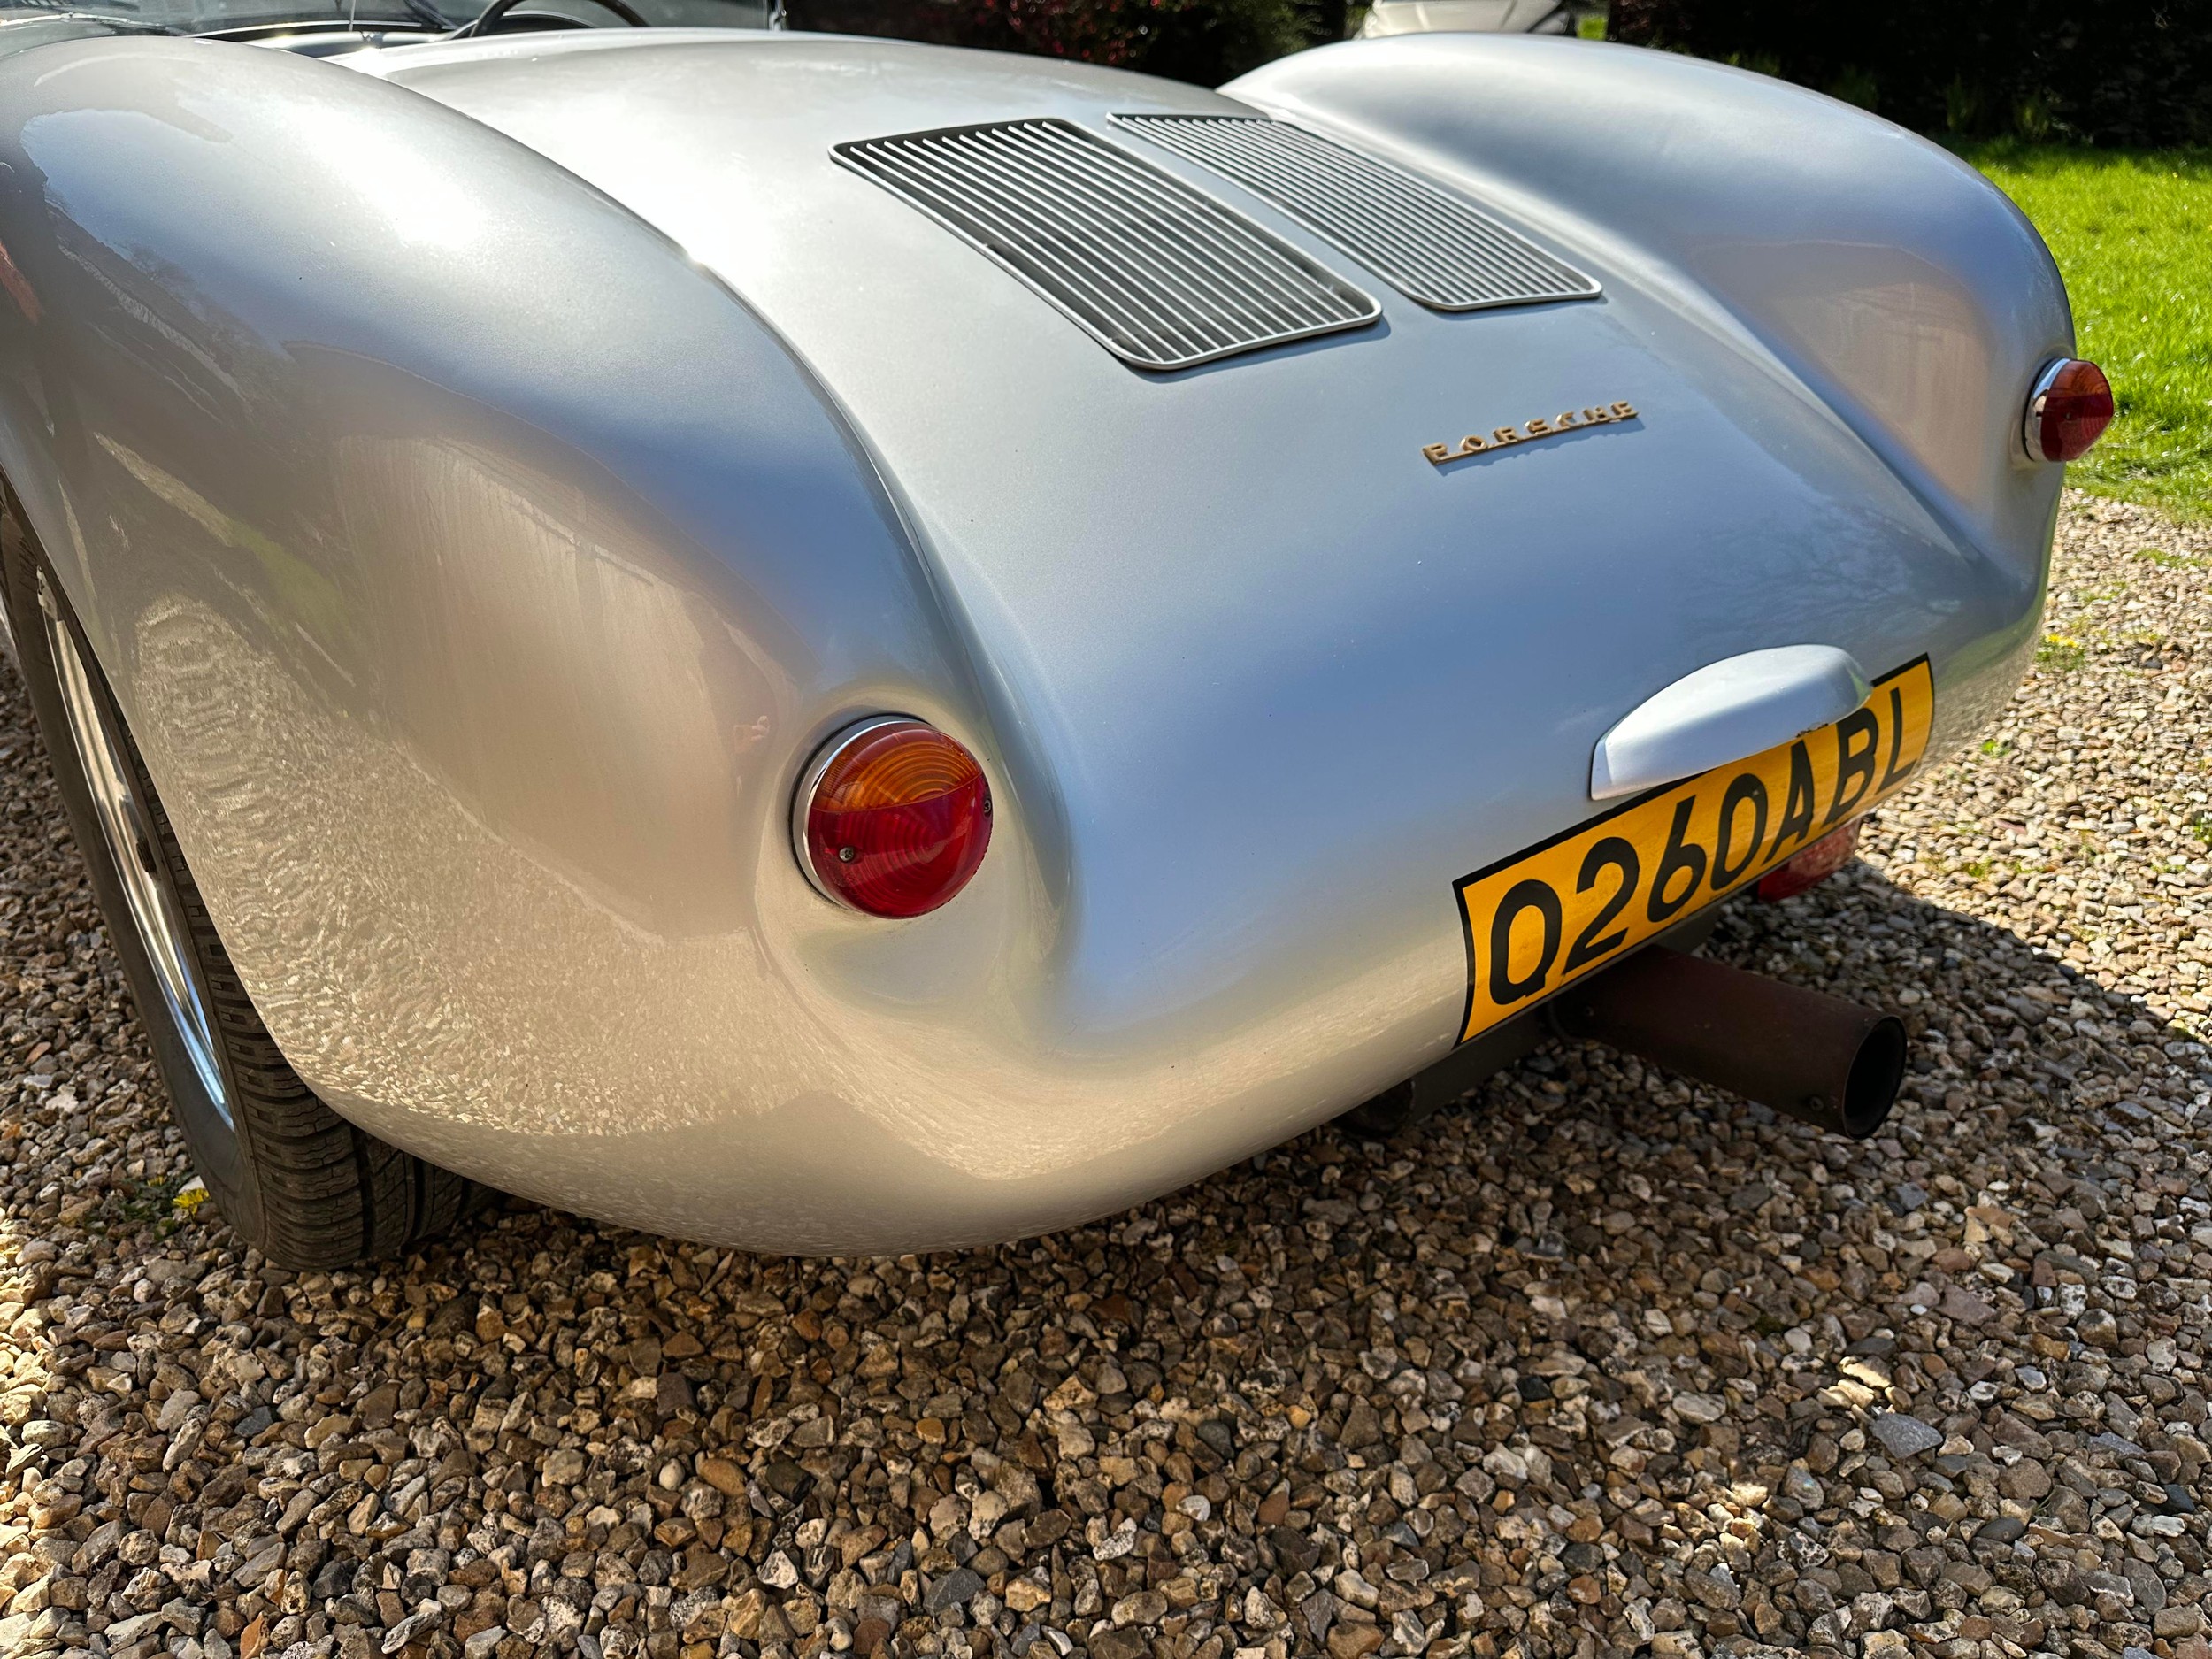 1996 TRAC Technic Porsche 550 Spyder Replica Registration Number Q260 ABL Metallic silver with a - Image 16 of 65